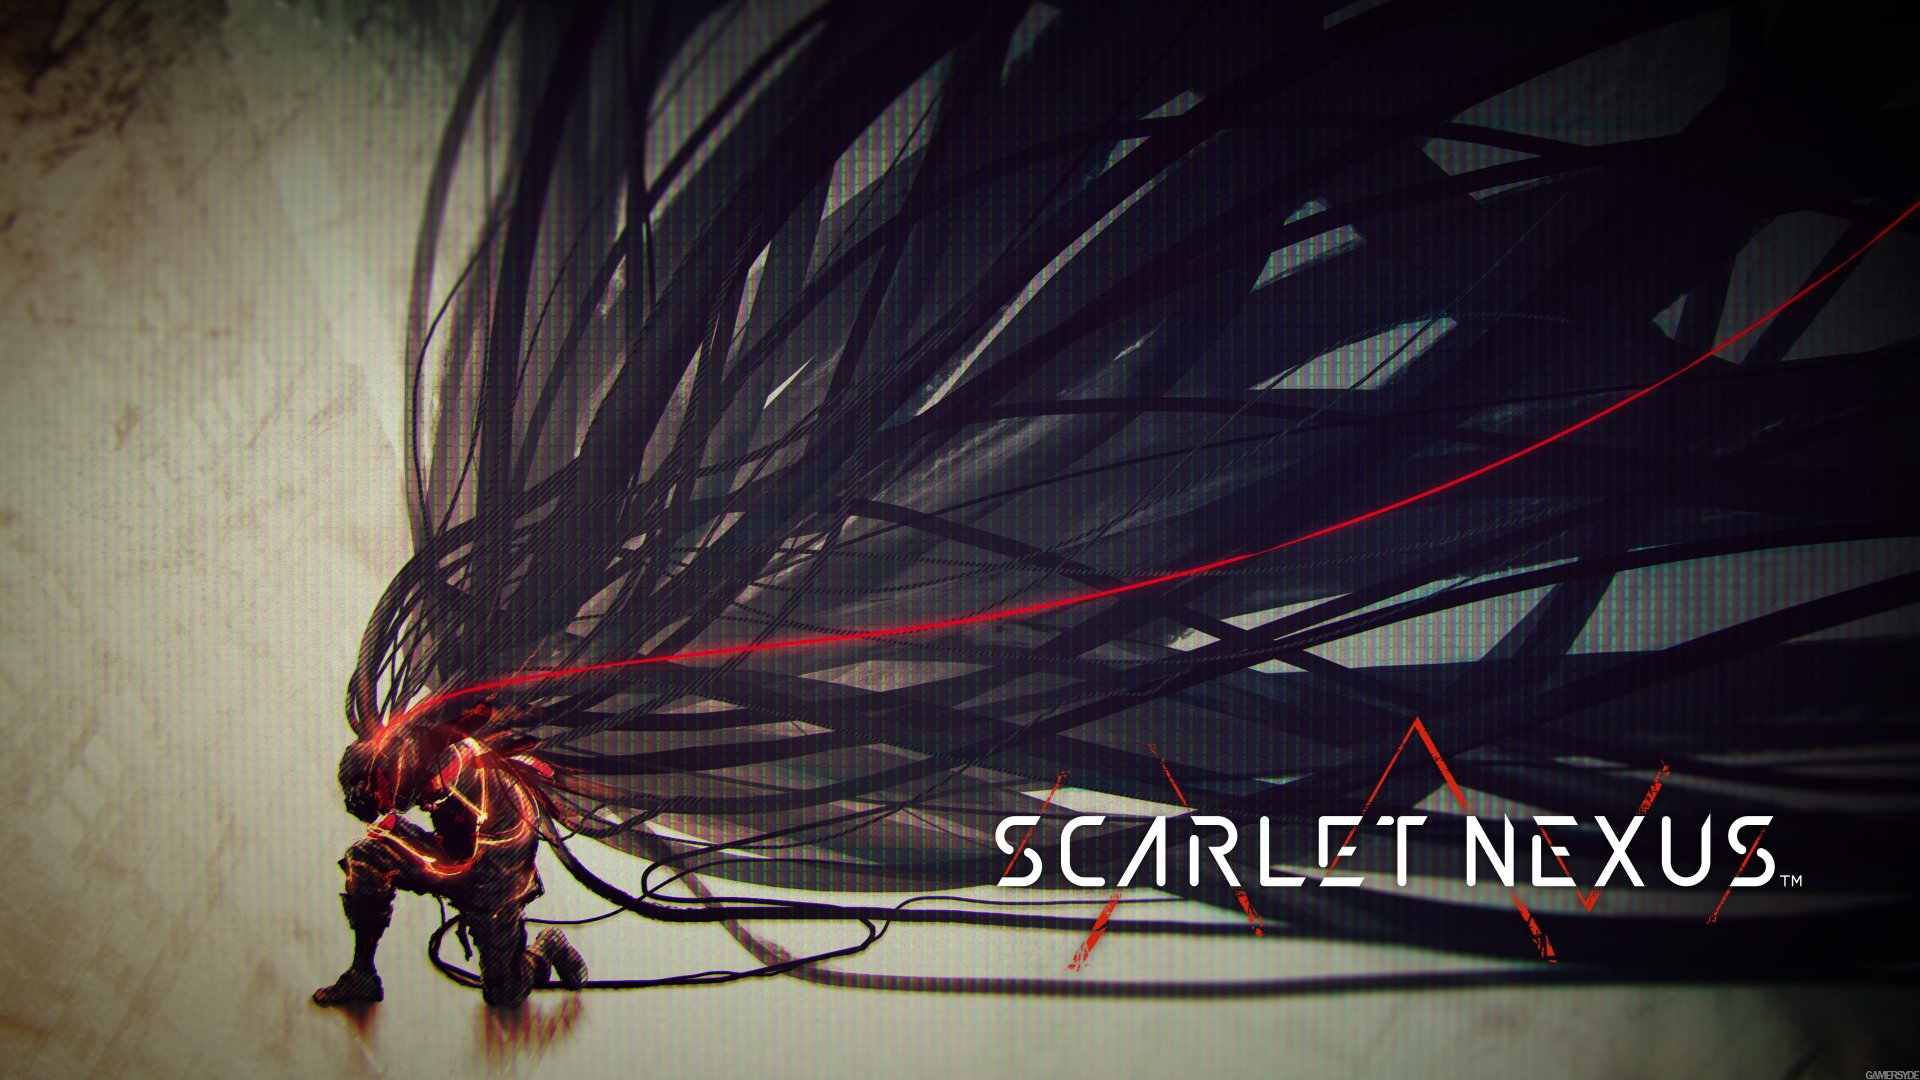 1920x1080 10+ Scarlet Nexus HD Wallpapers and Backgrounds